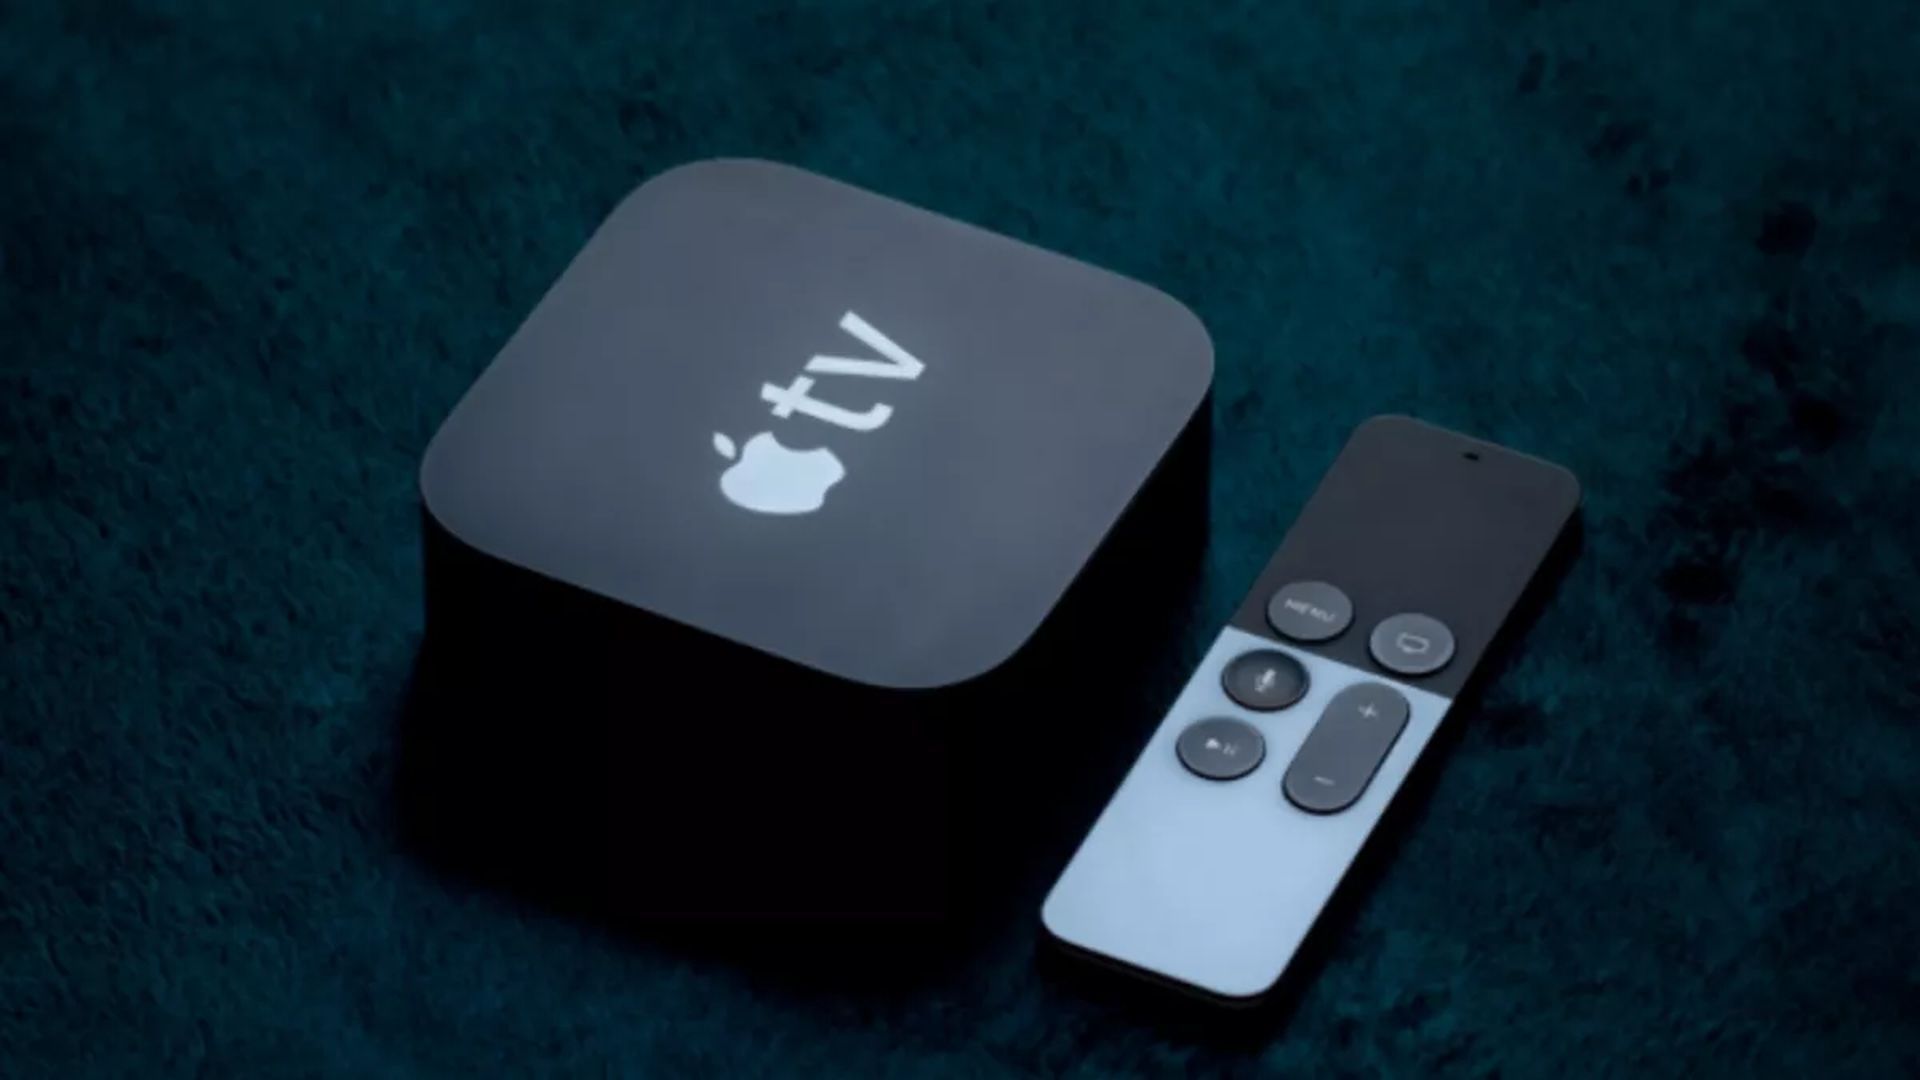 Apple TV Plus not working: How to fix it?